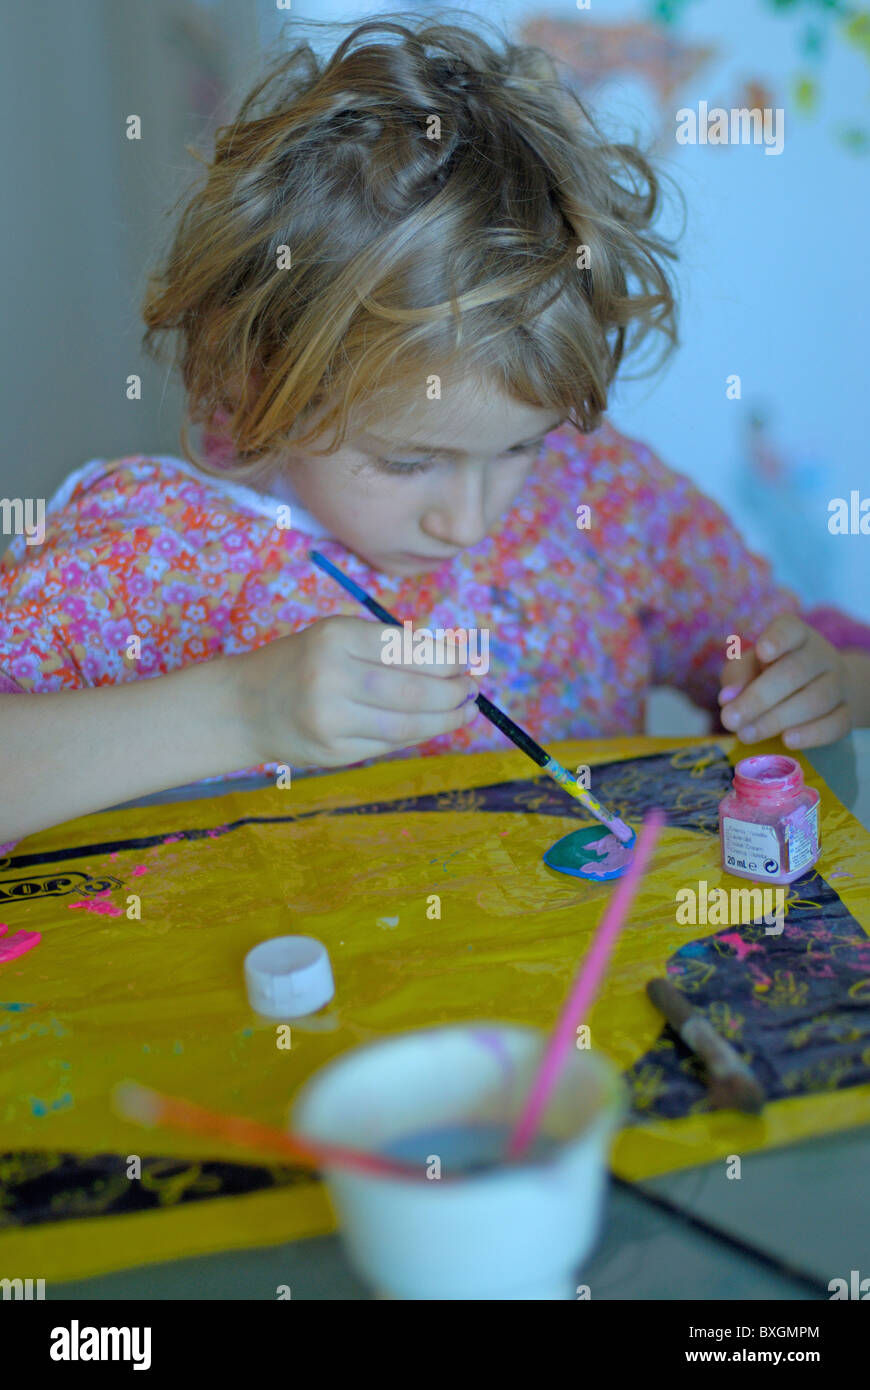 Little blond girl painting in the kitchen, France. Stock Photo